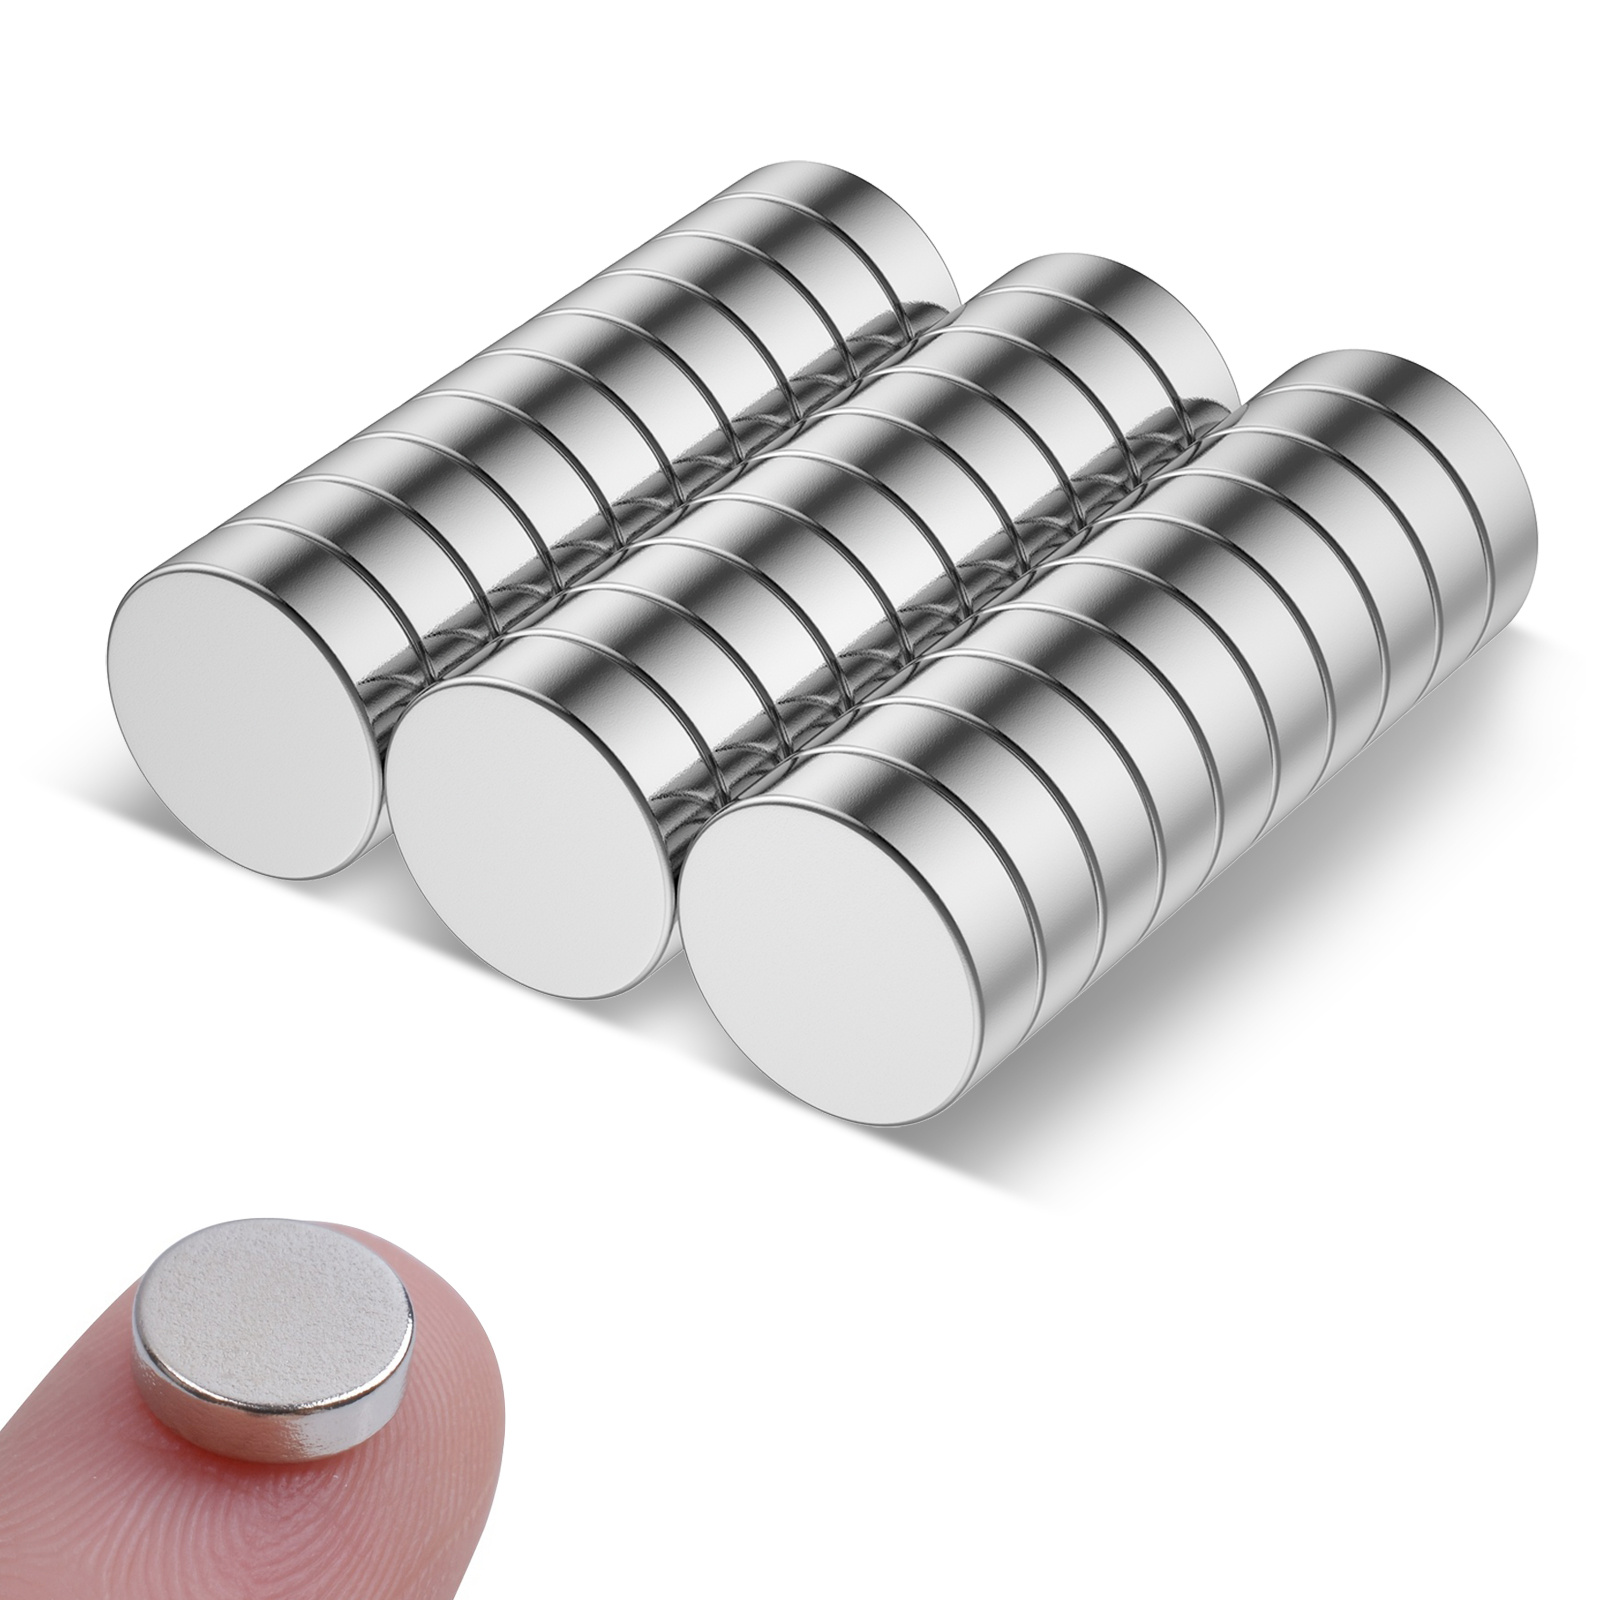 30pcs Super Strong Neodymium Magnets, 7X2mm Small Disk Magnets,  Multi-function Round Magnets, Ideal For Refrigerator, Whiteboard, Office,  Home Kitchen